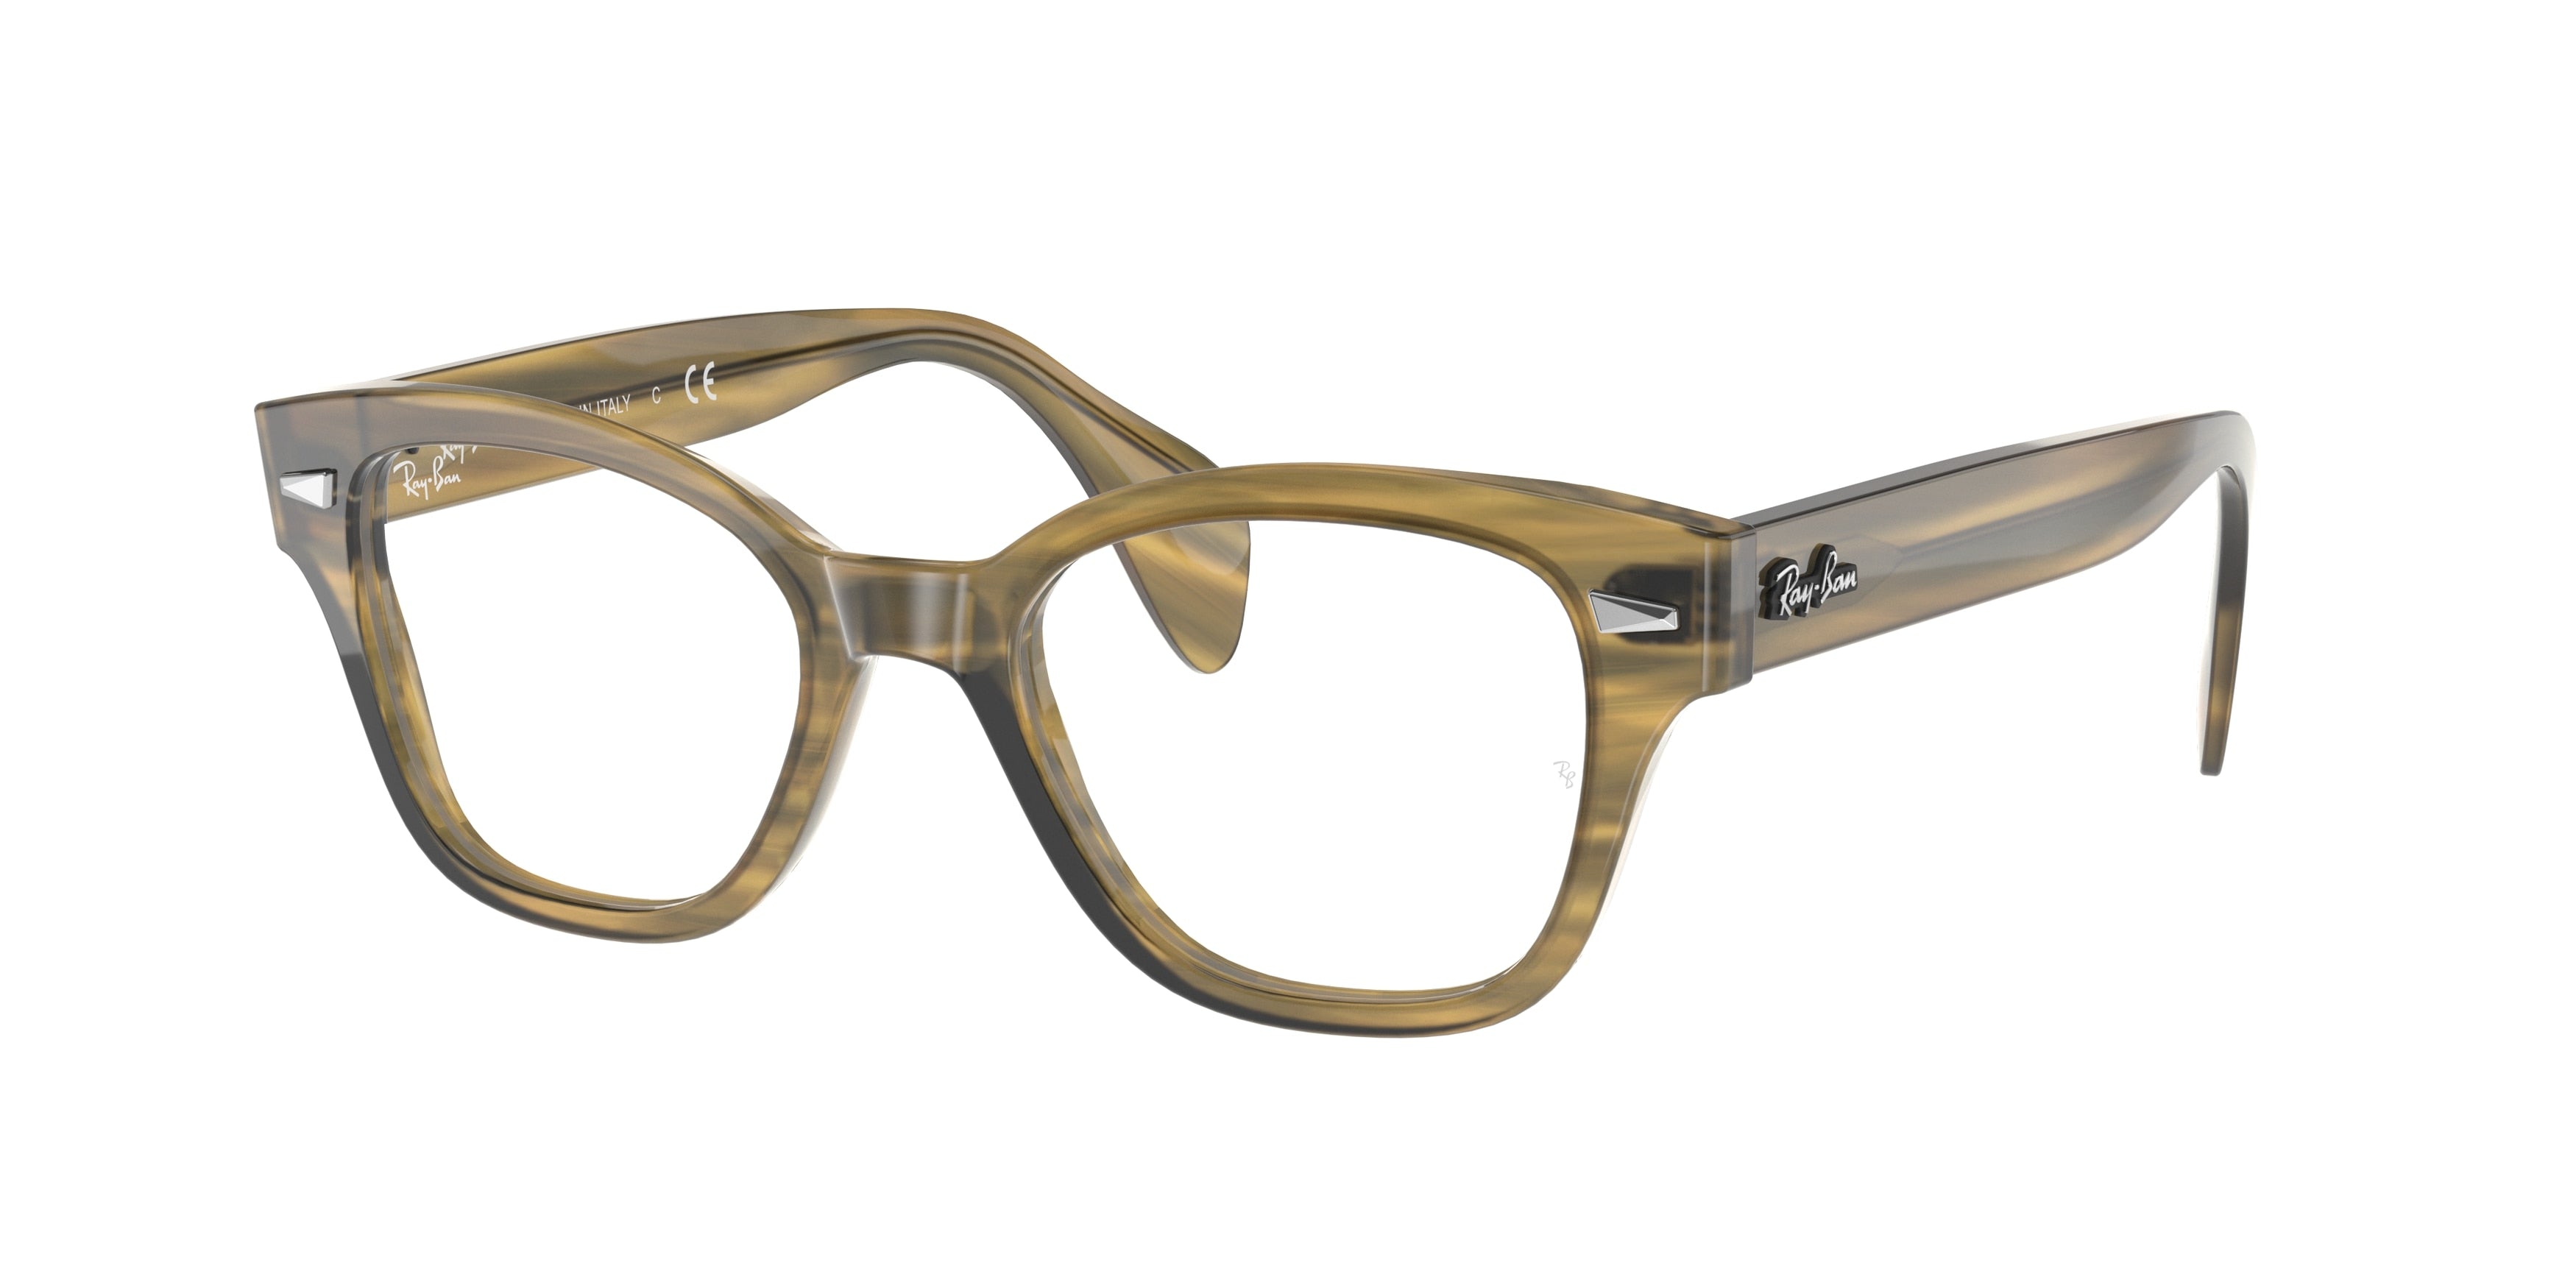 Ray-Ban Optical RX0880 Square Eyeglasses  8056-Striped Yellow 49-145-19 - Color Map Yellow